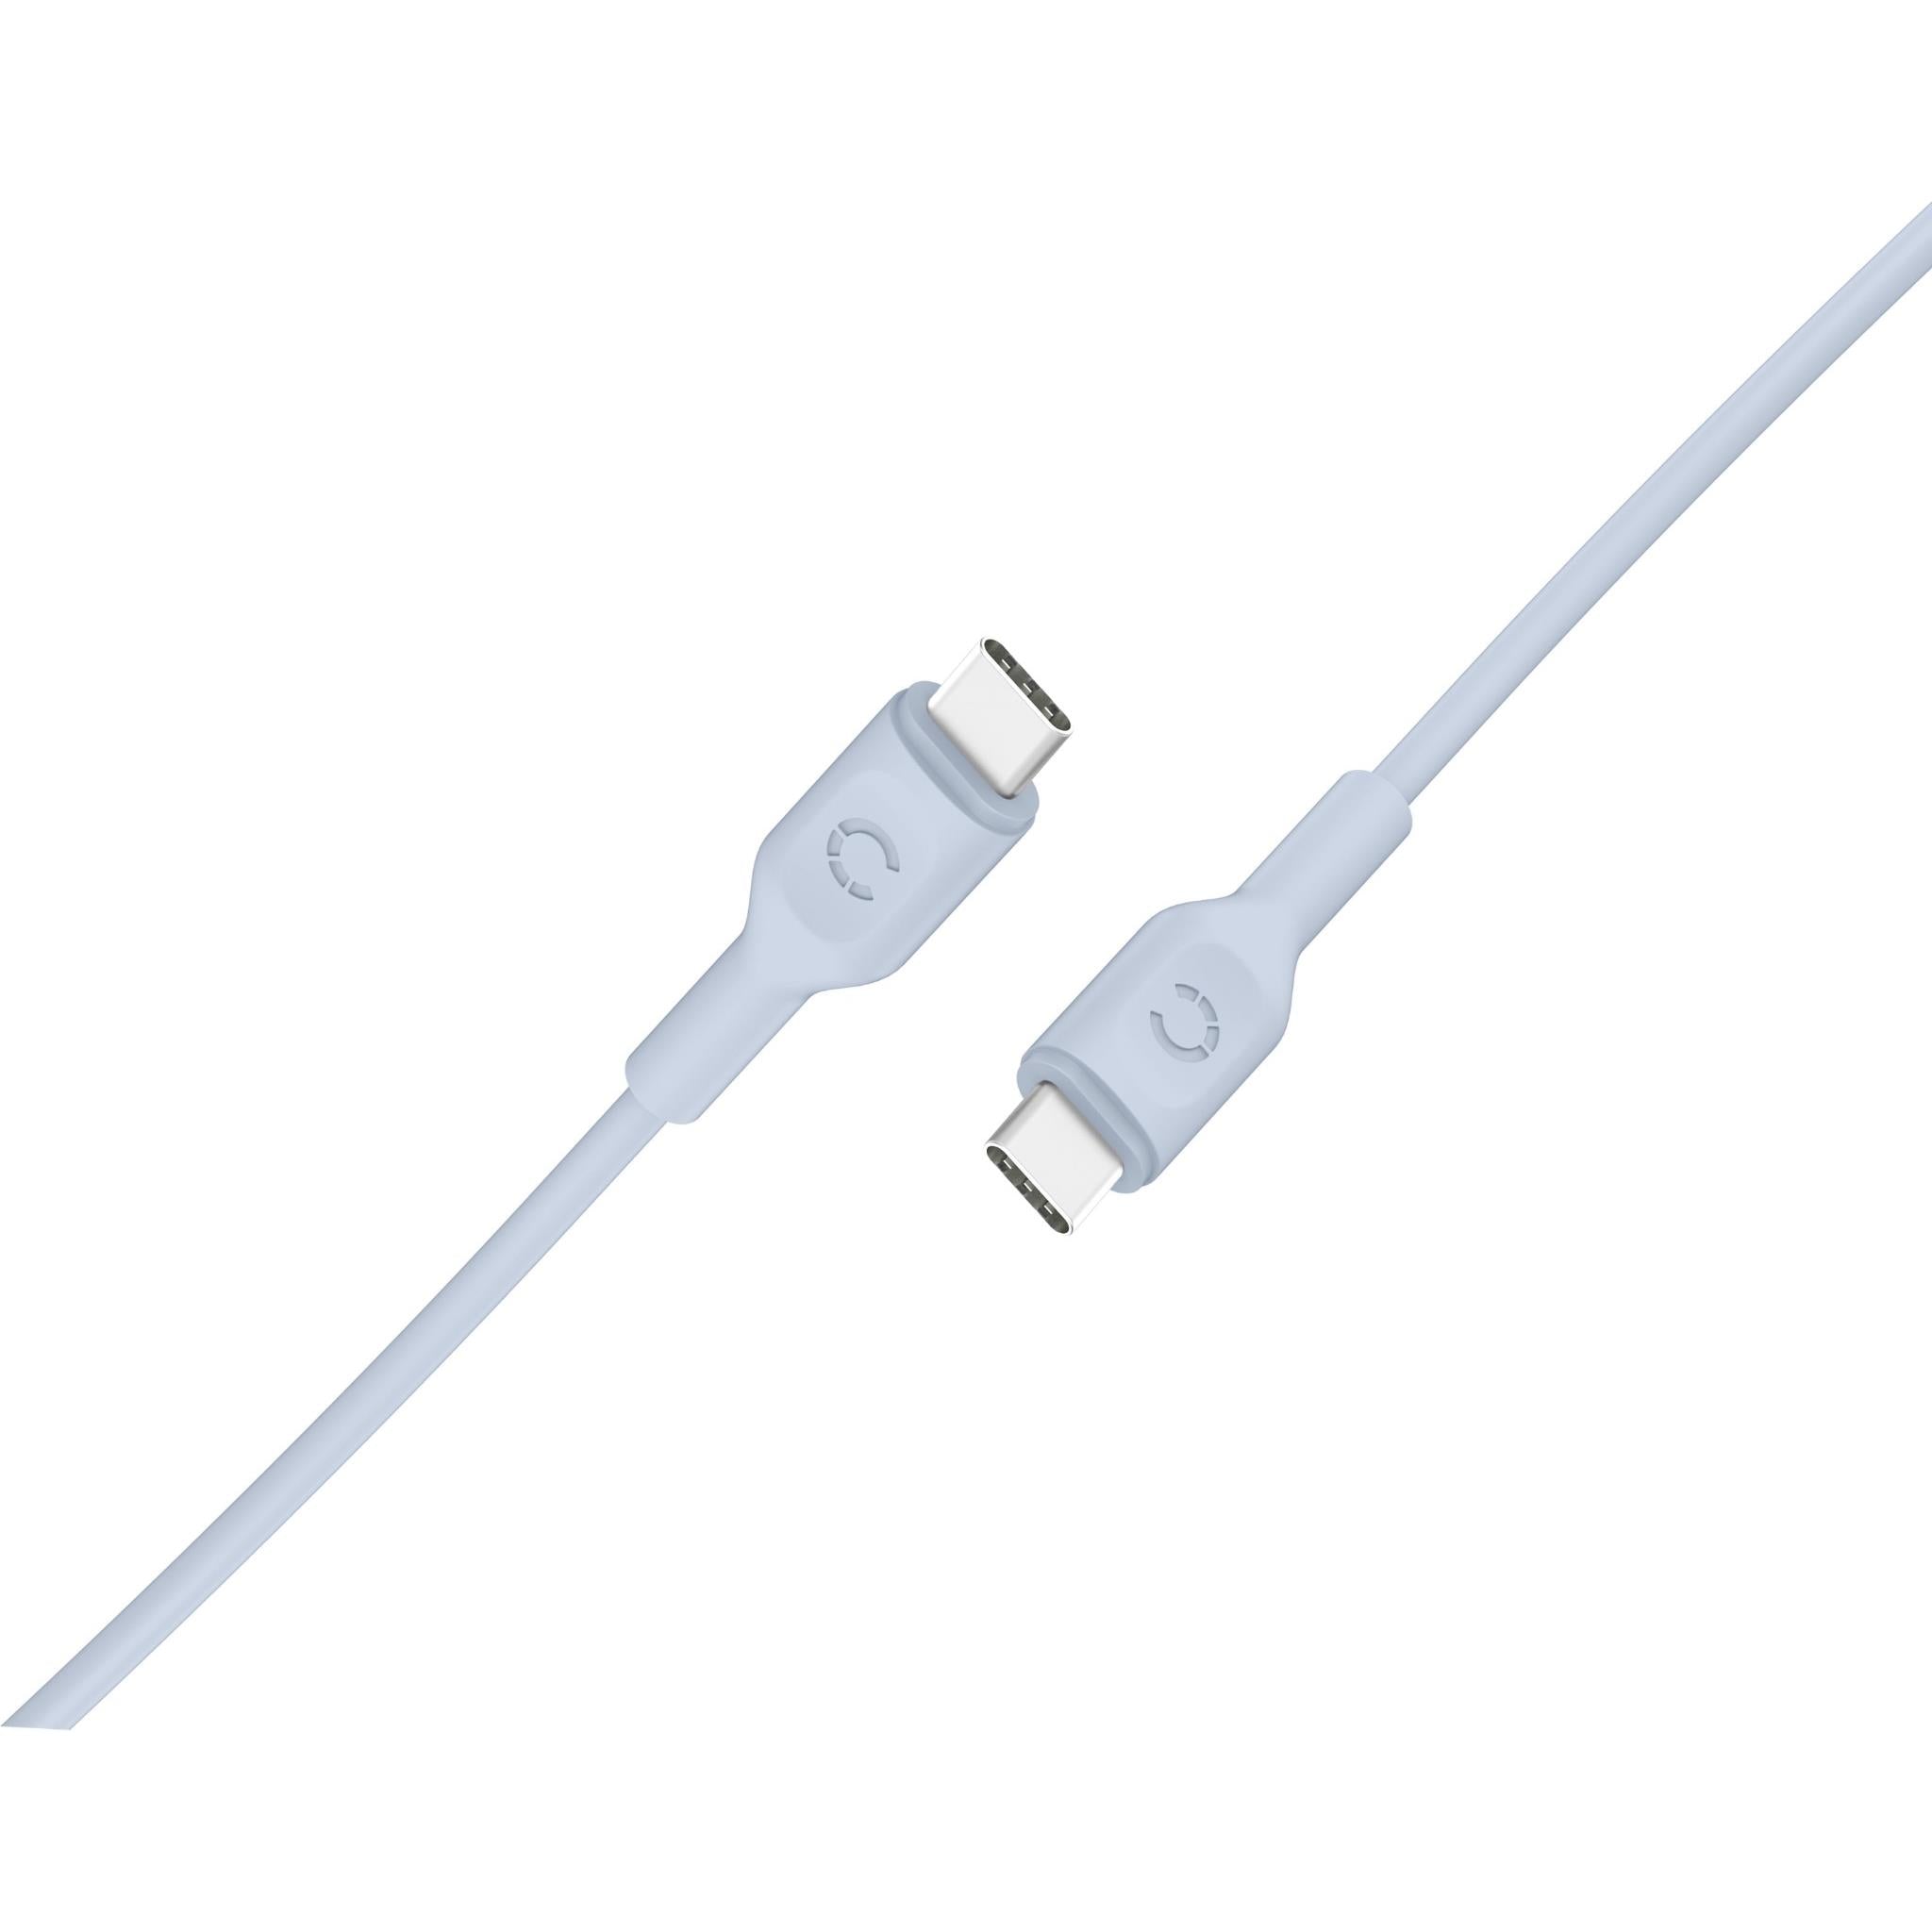 cygnett charge and connect usb-c to usb-c cable 1.2m (light blue)